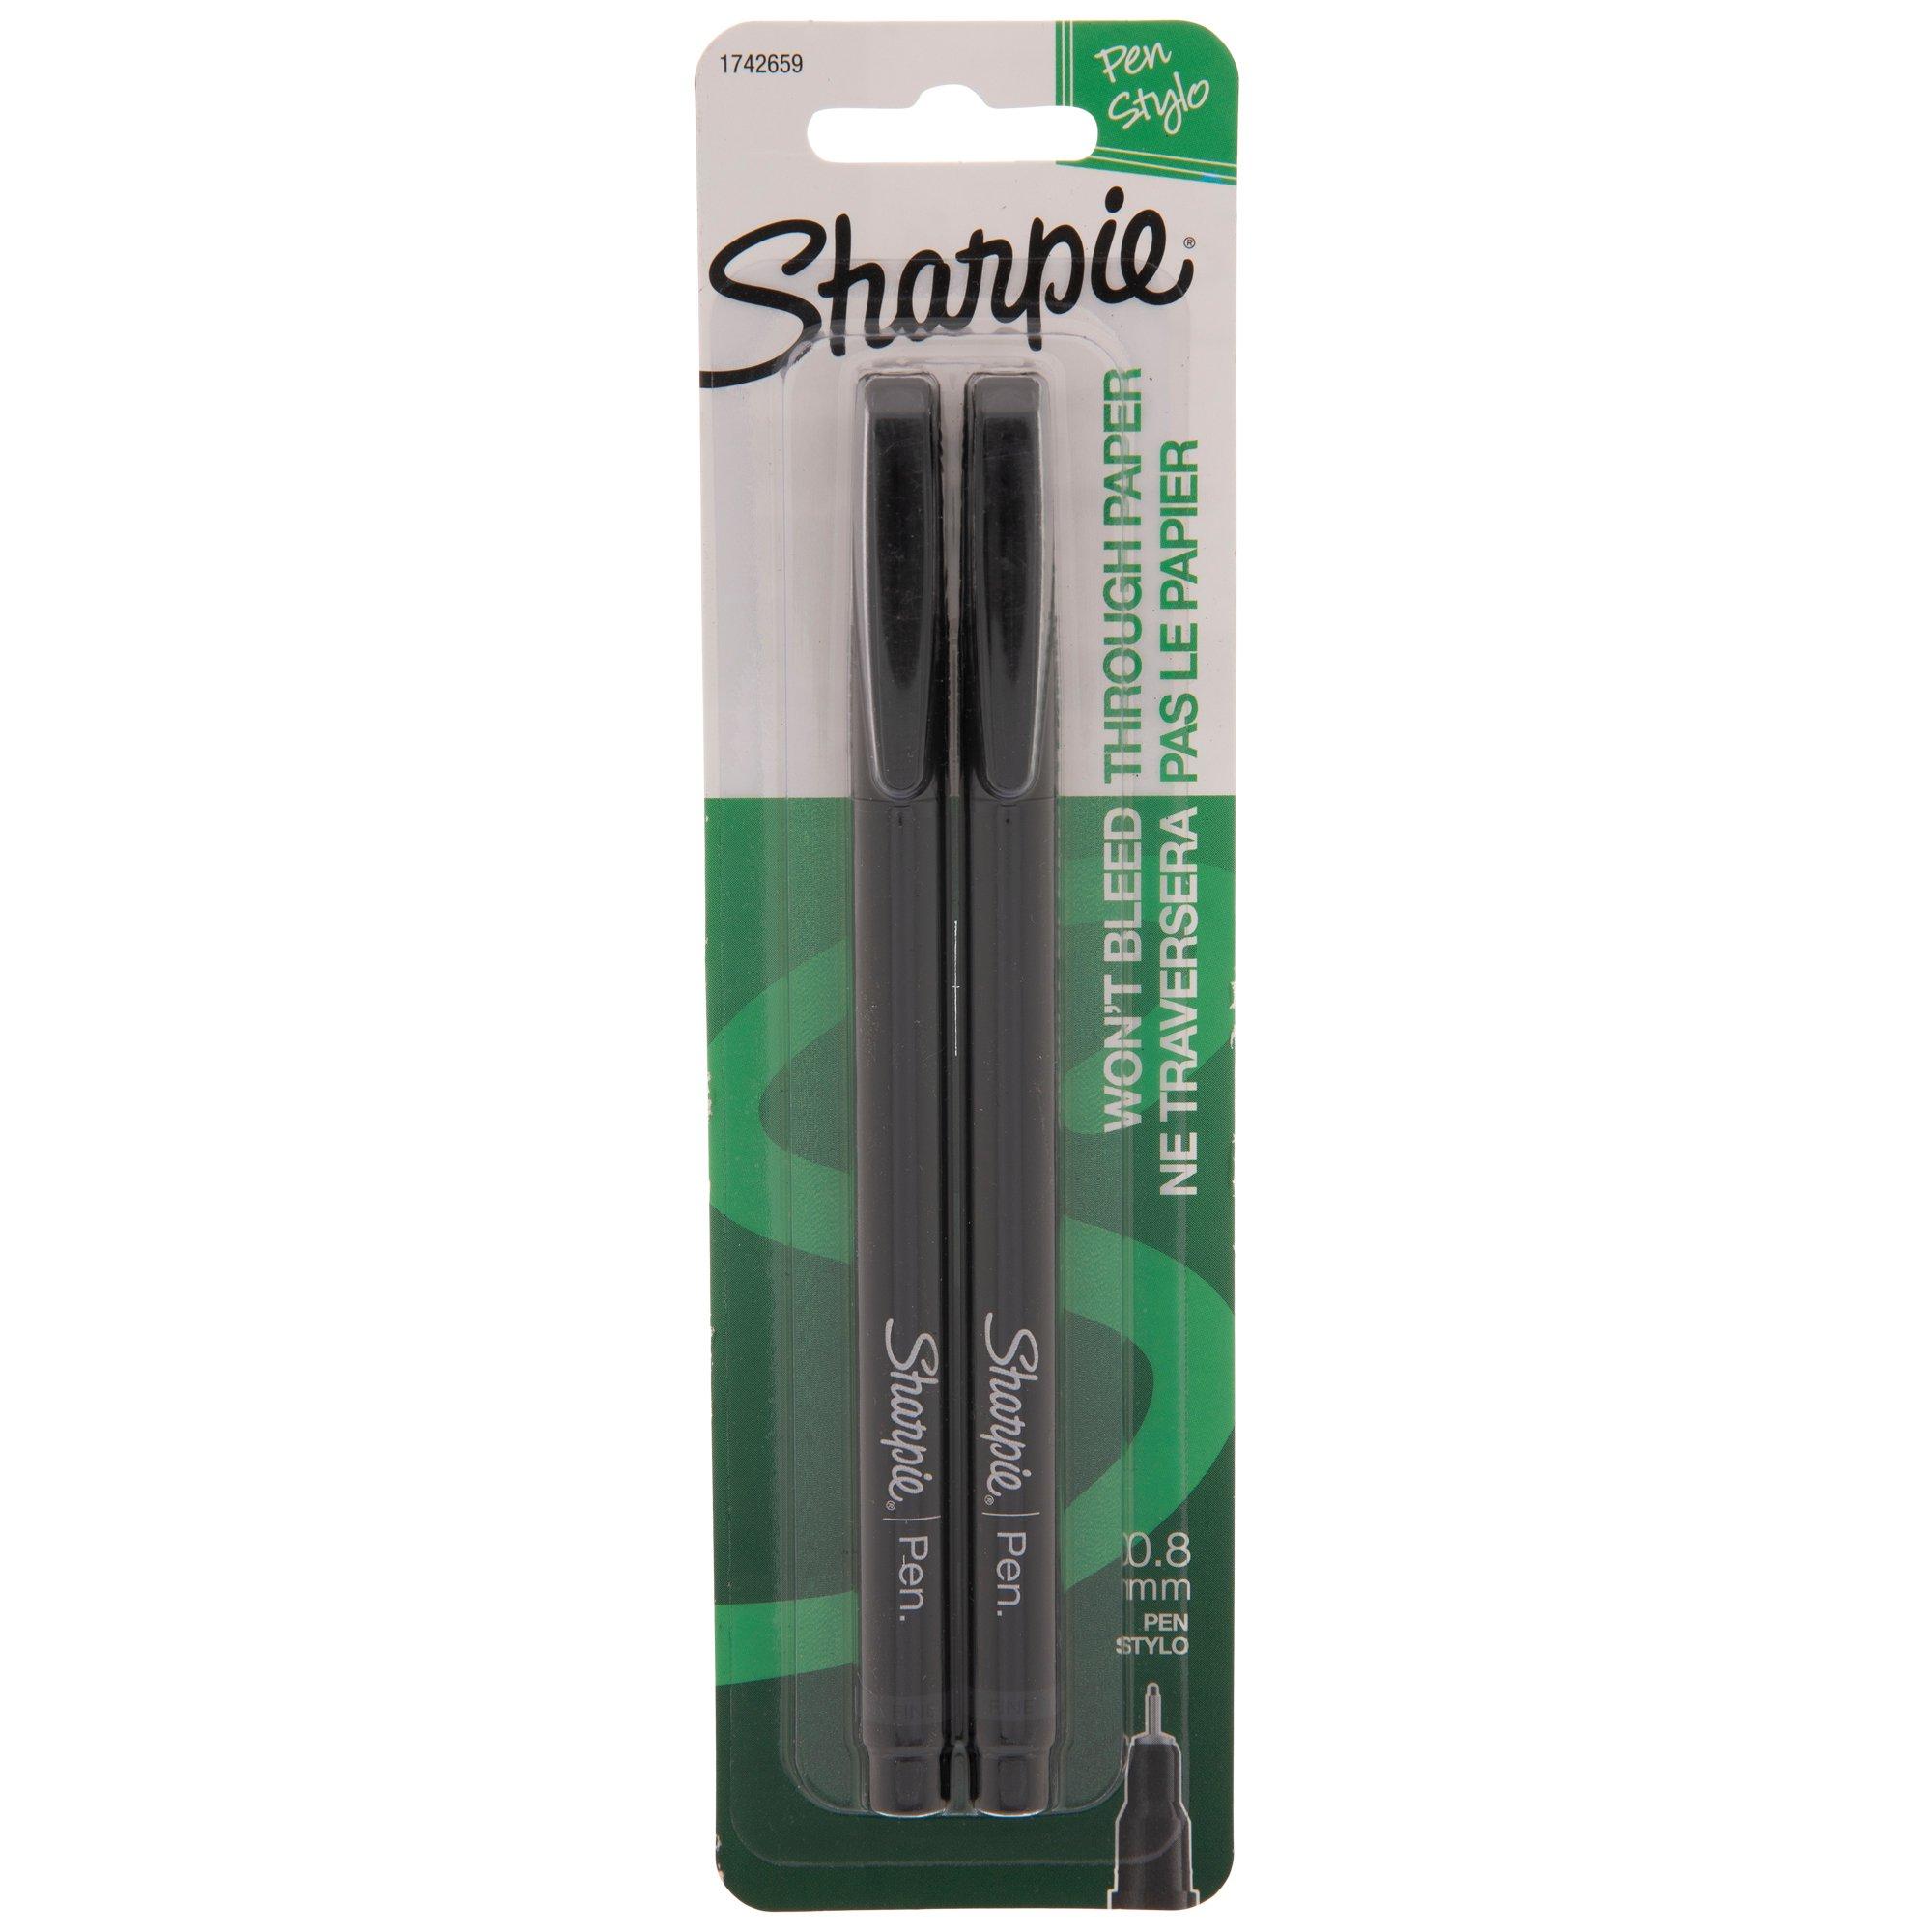 Sharpie 2 Pack - Black/Gold - October's Very Own